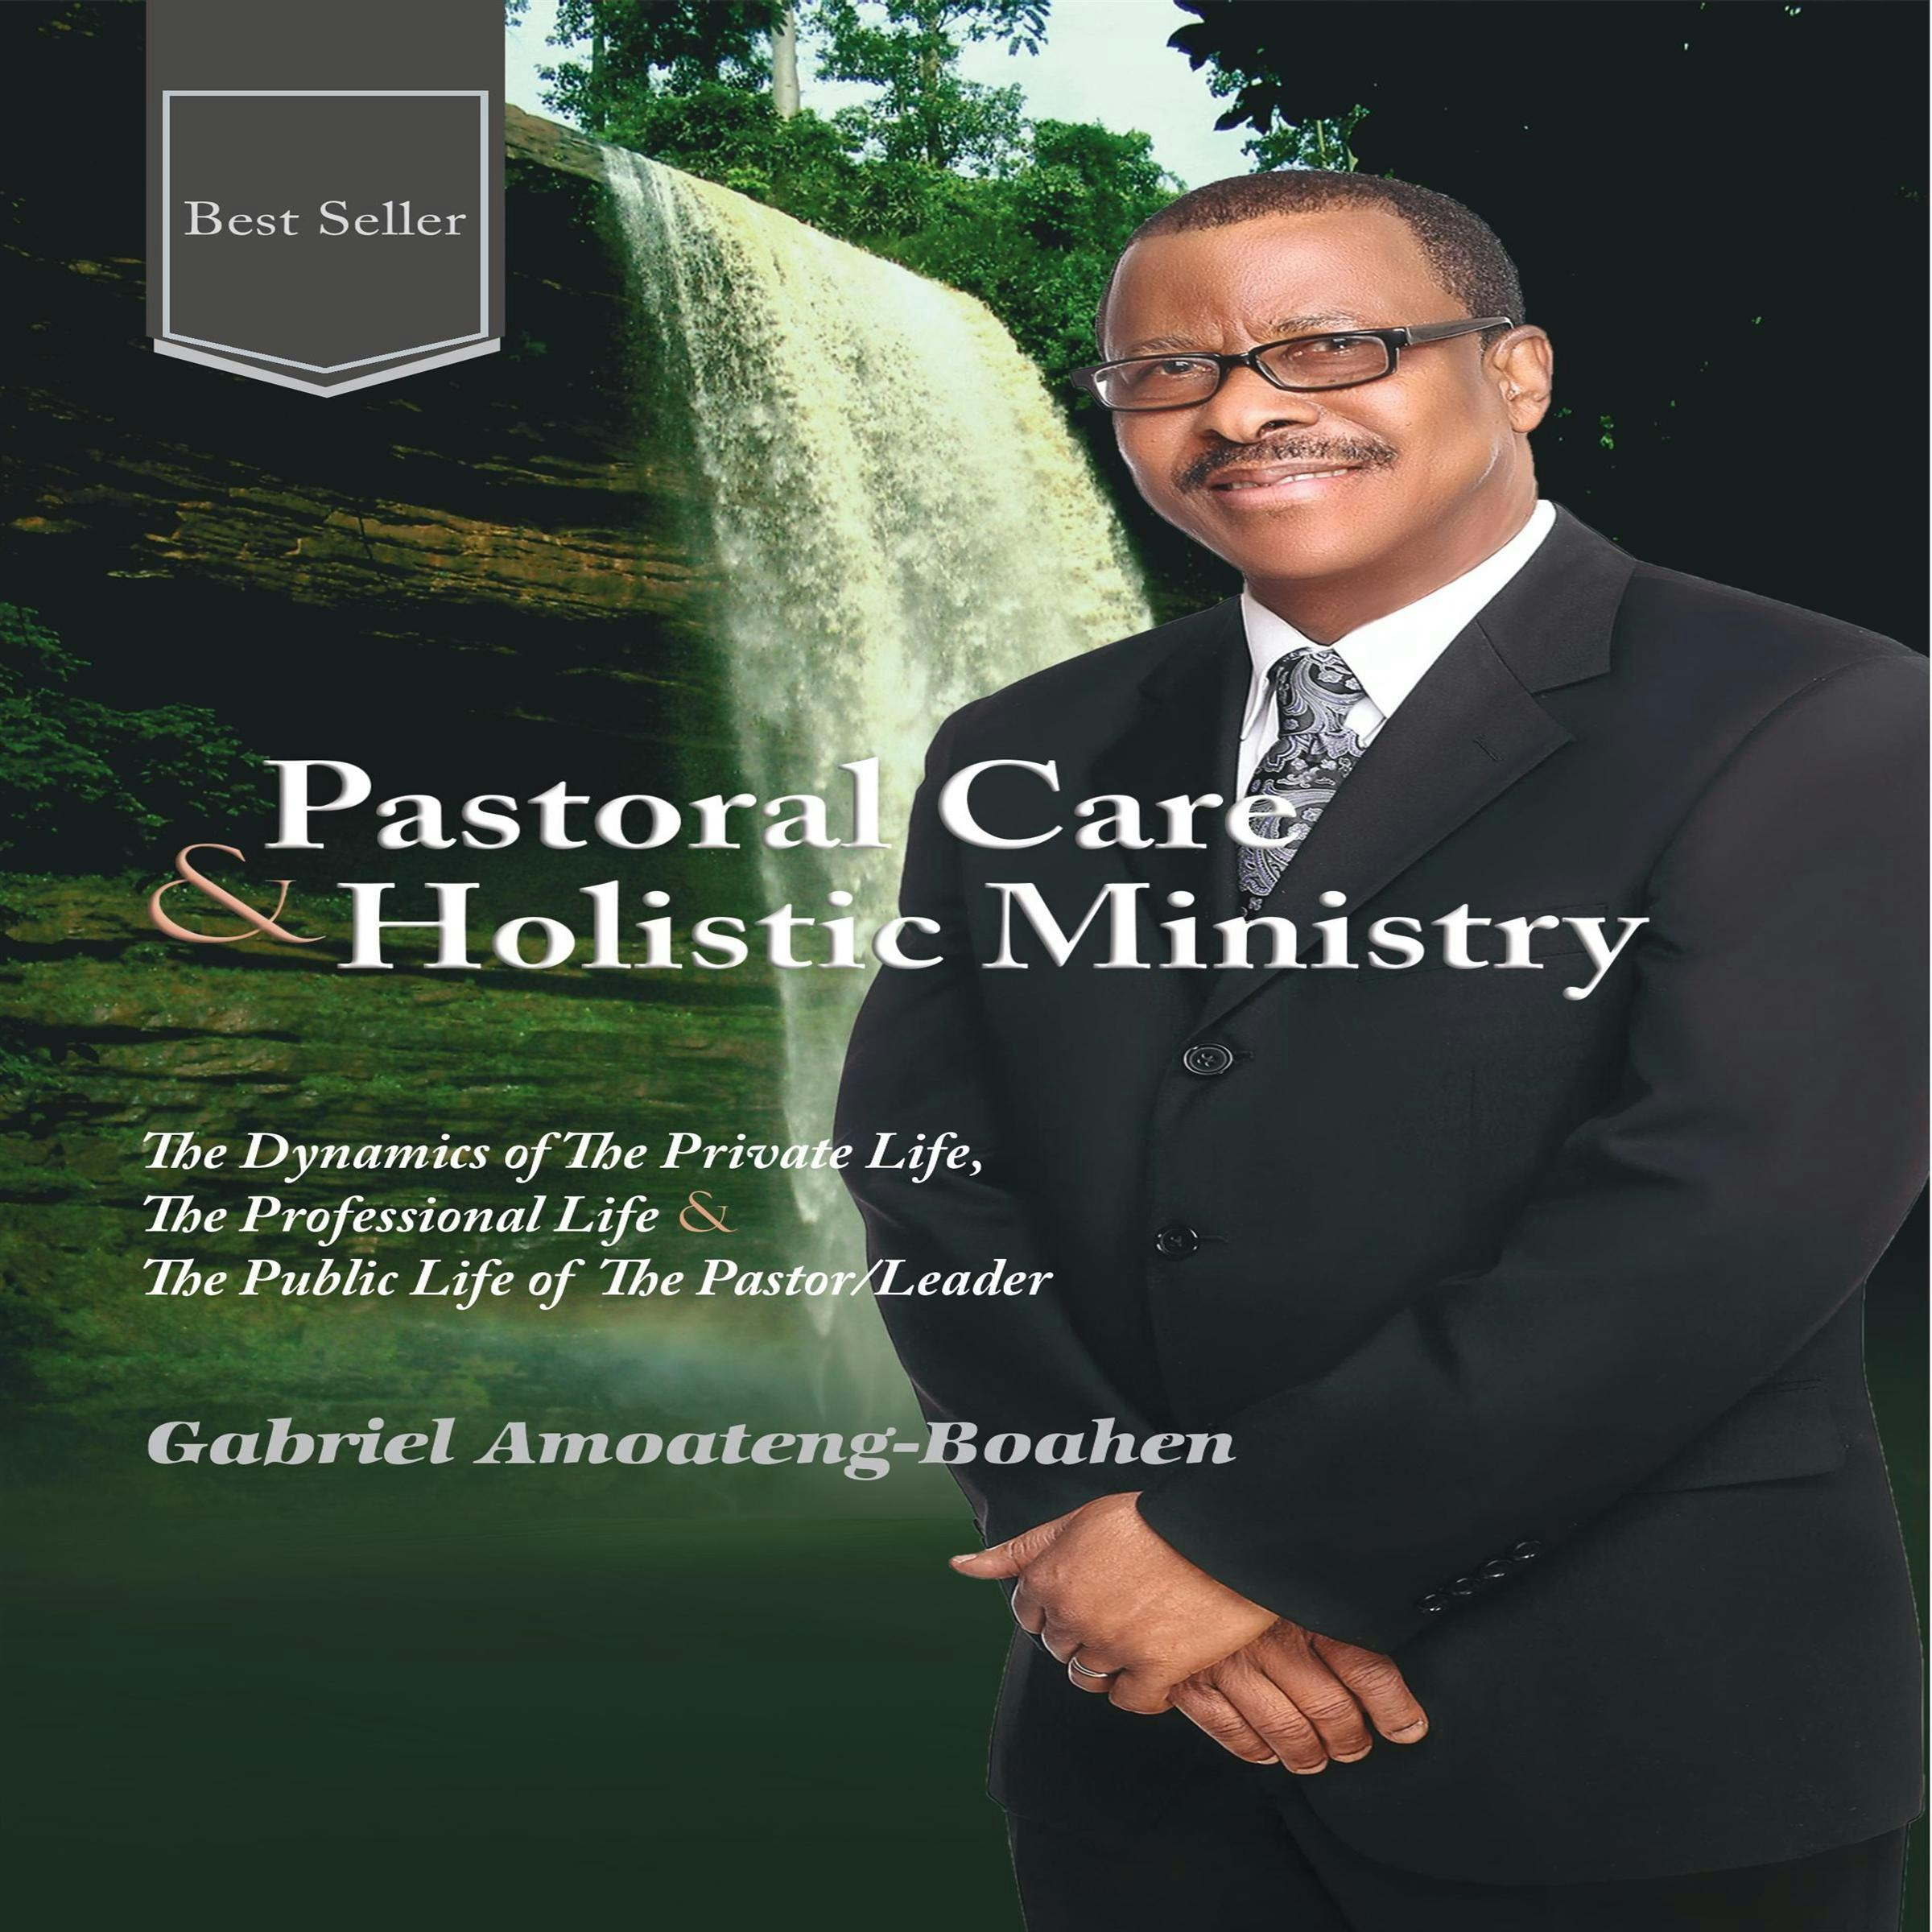 Pastoral Care and Holistic Ministry - undefined